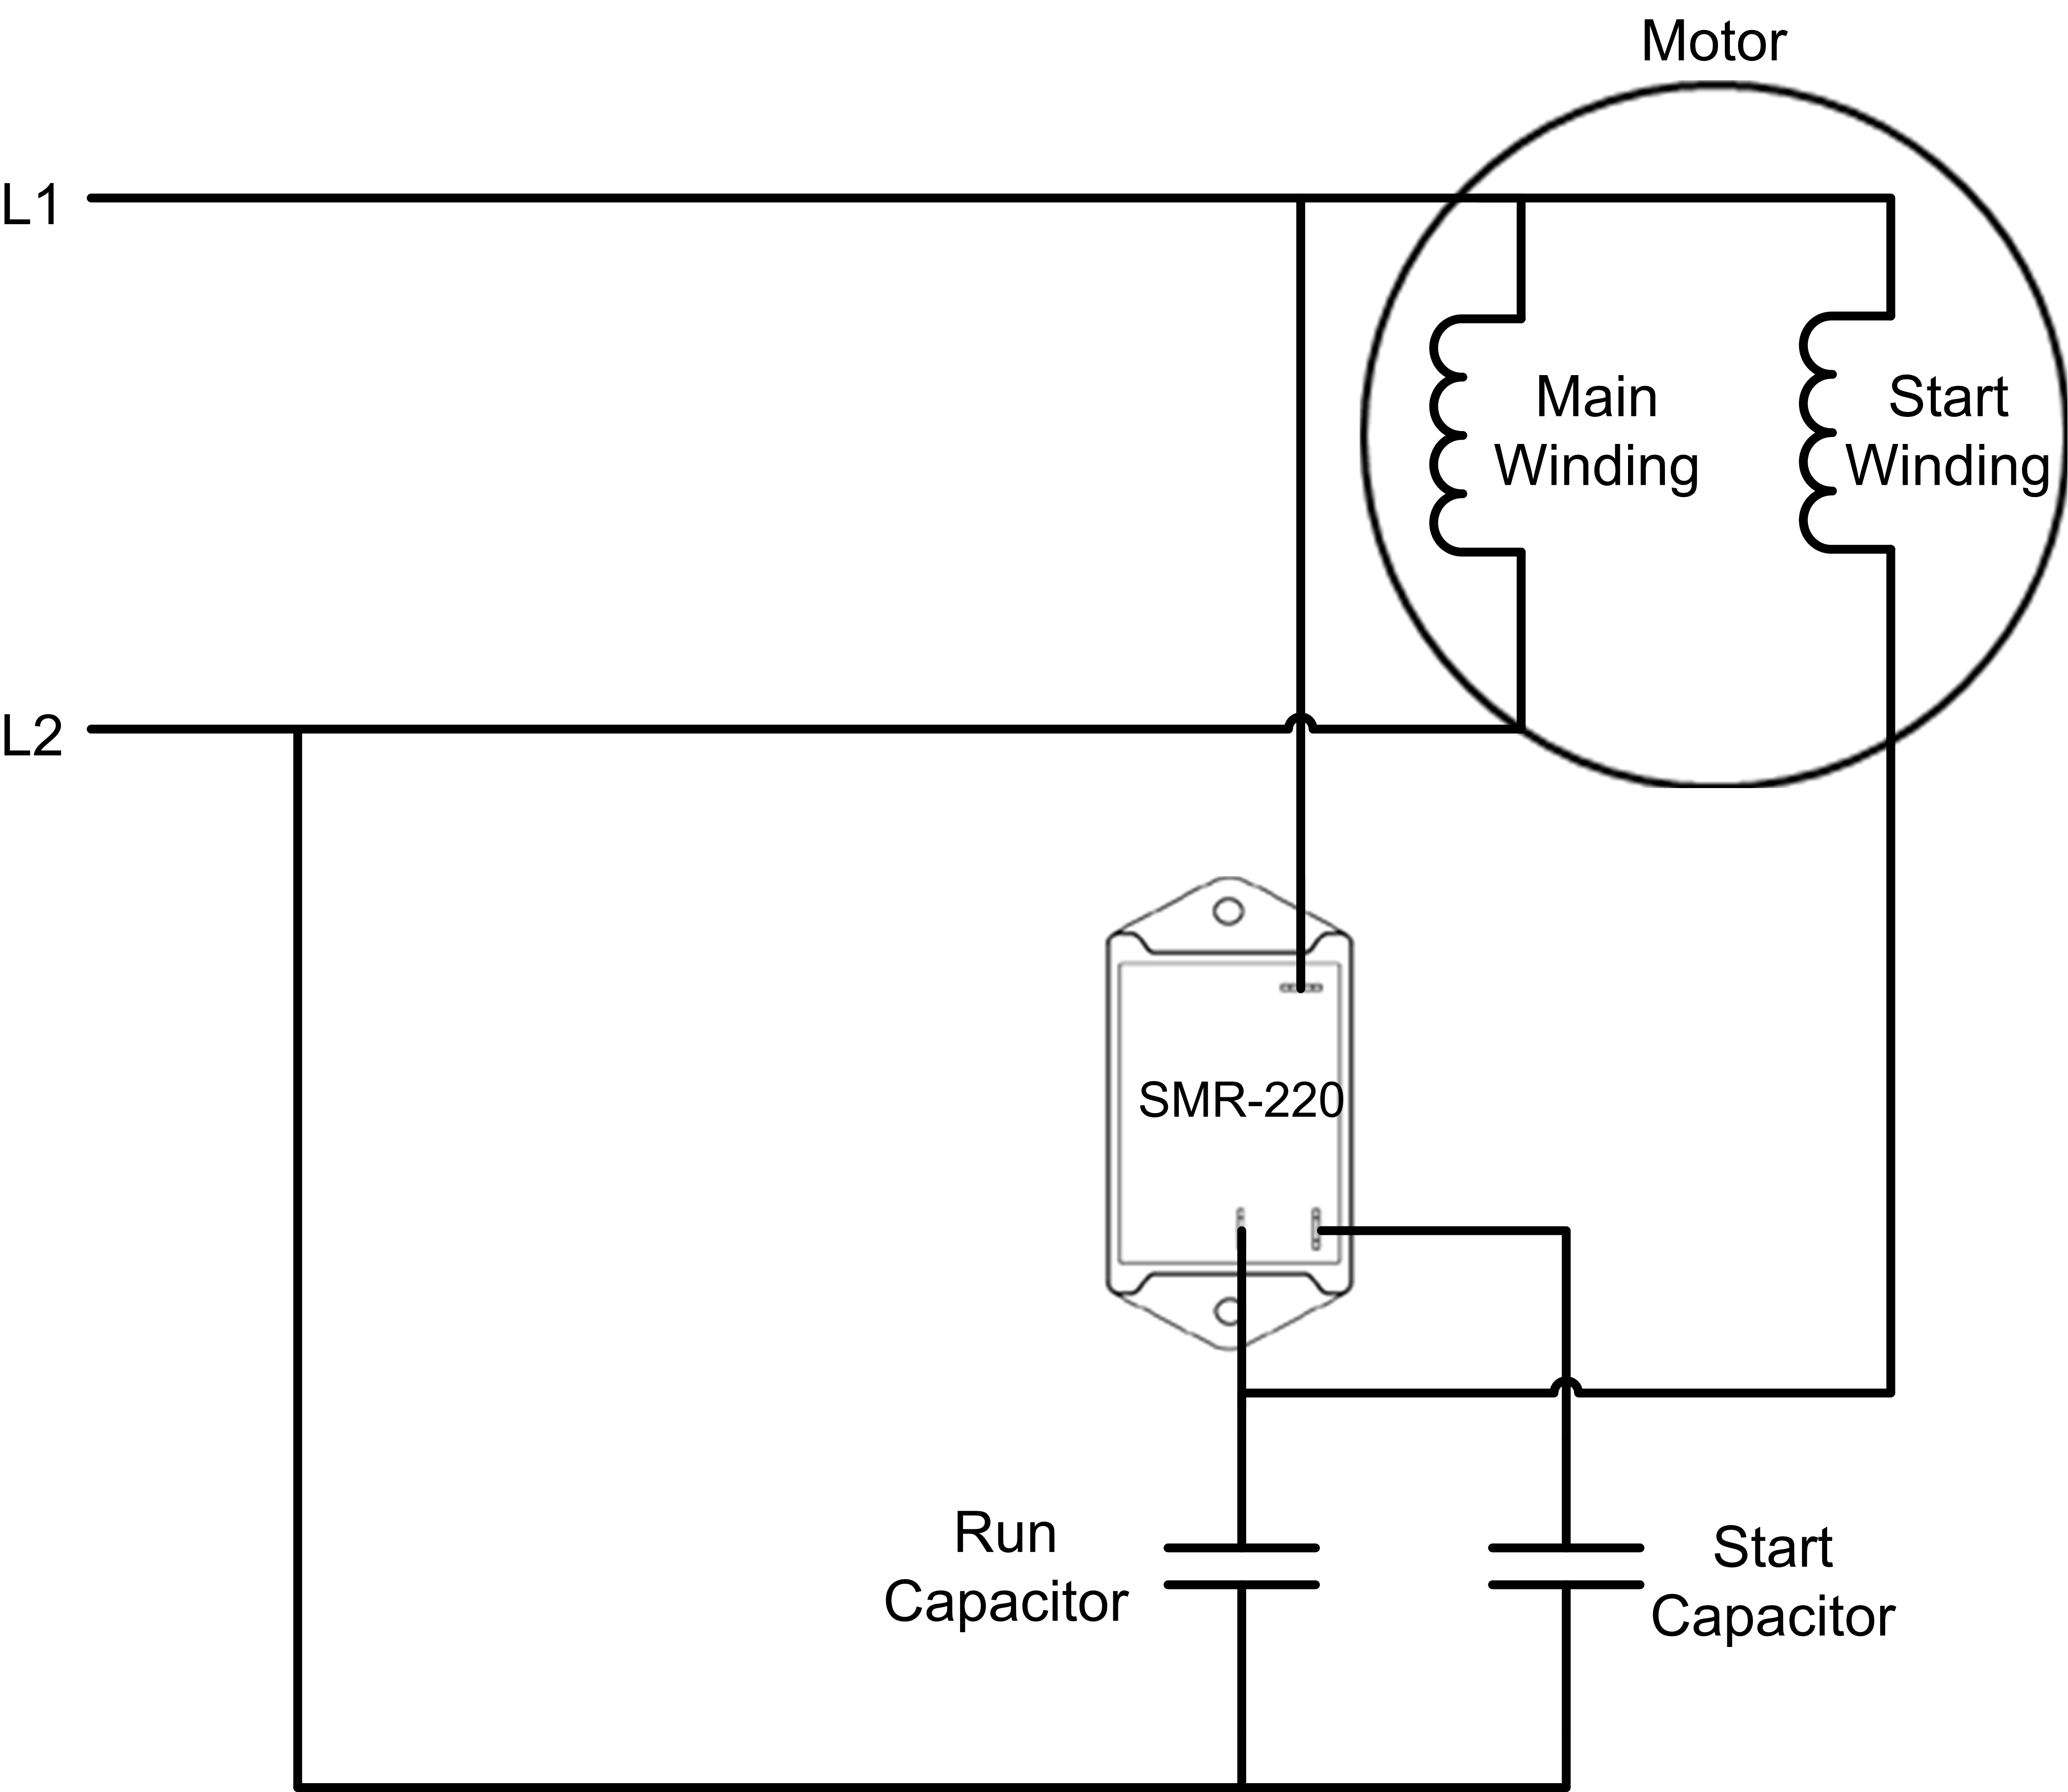 Potential Relay Start Capacitor Wiring Diagram from www.ctismartsystems.com